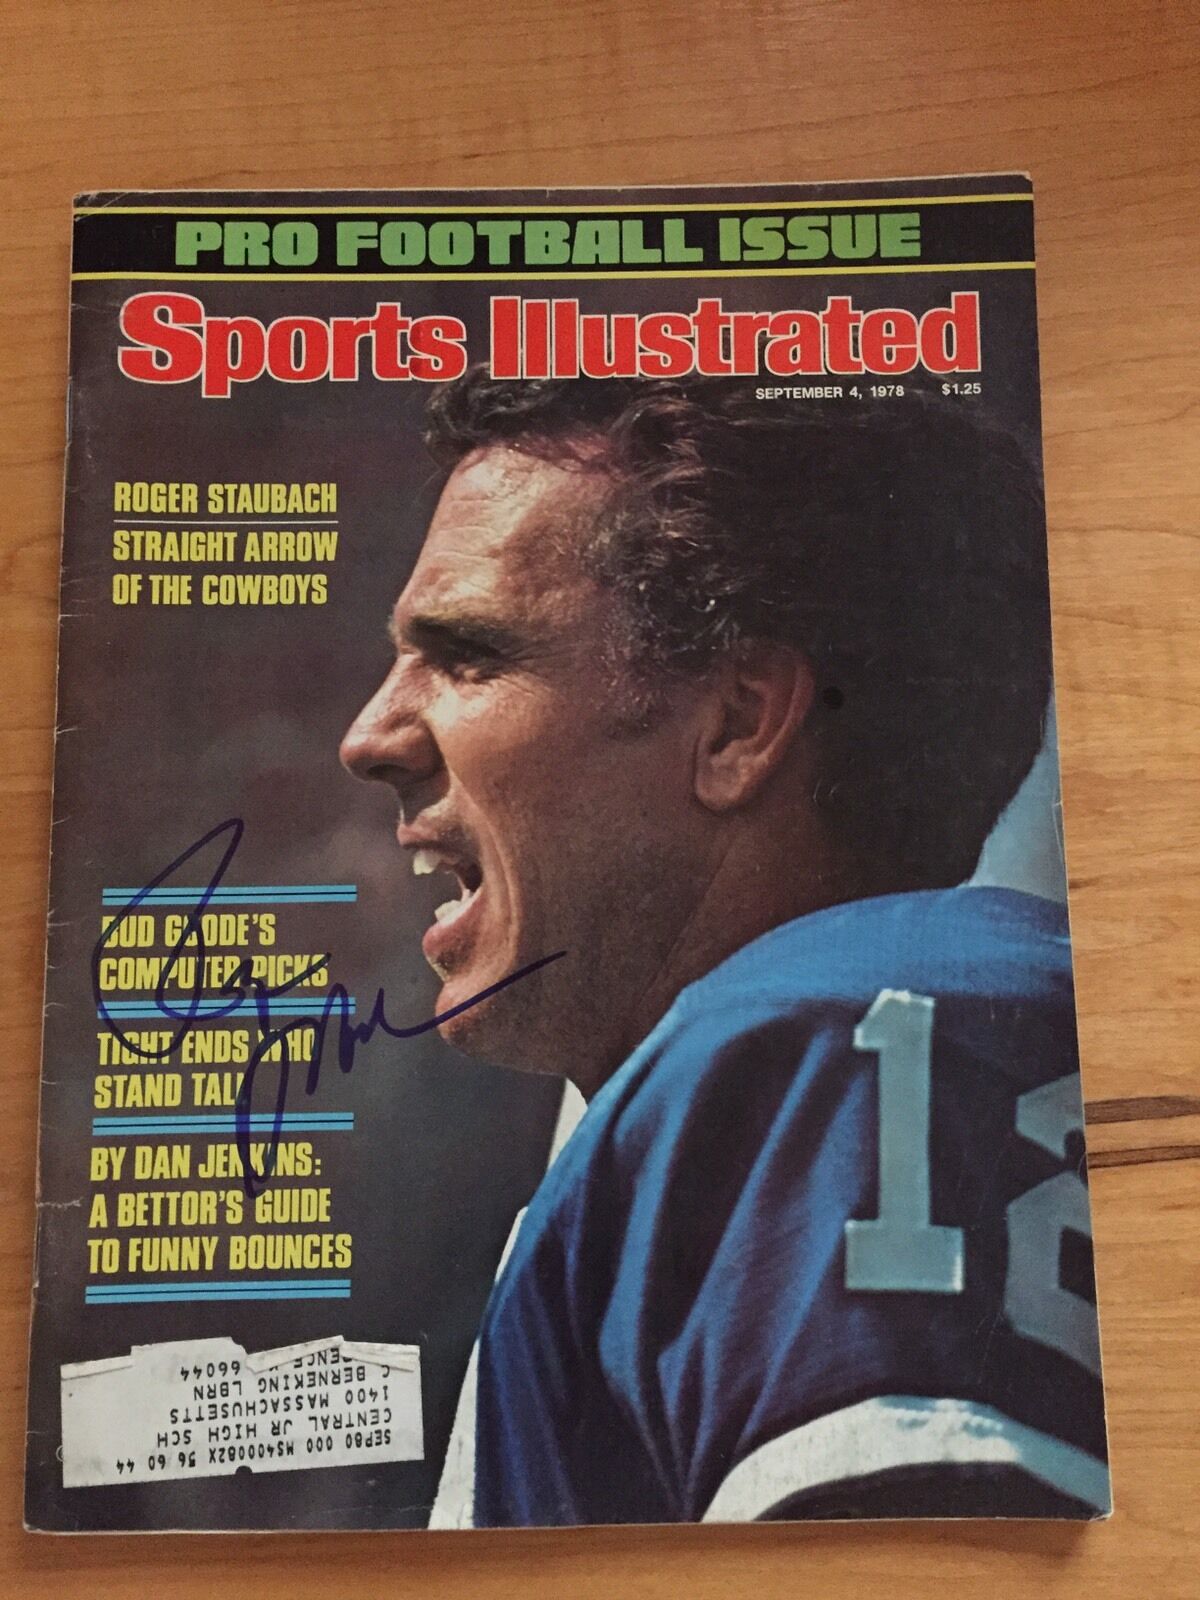 Roger Staubach Signed Sports Illustrated